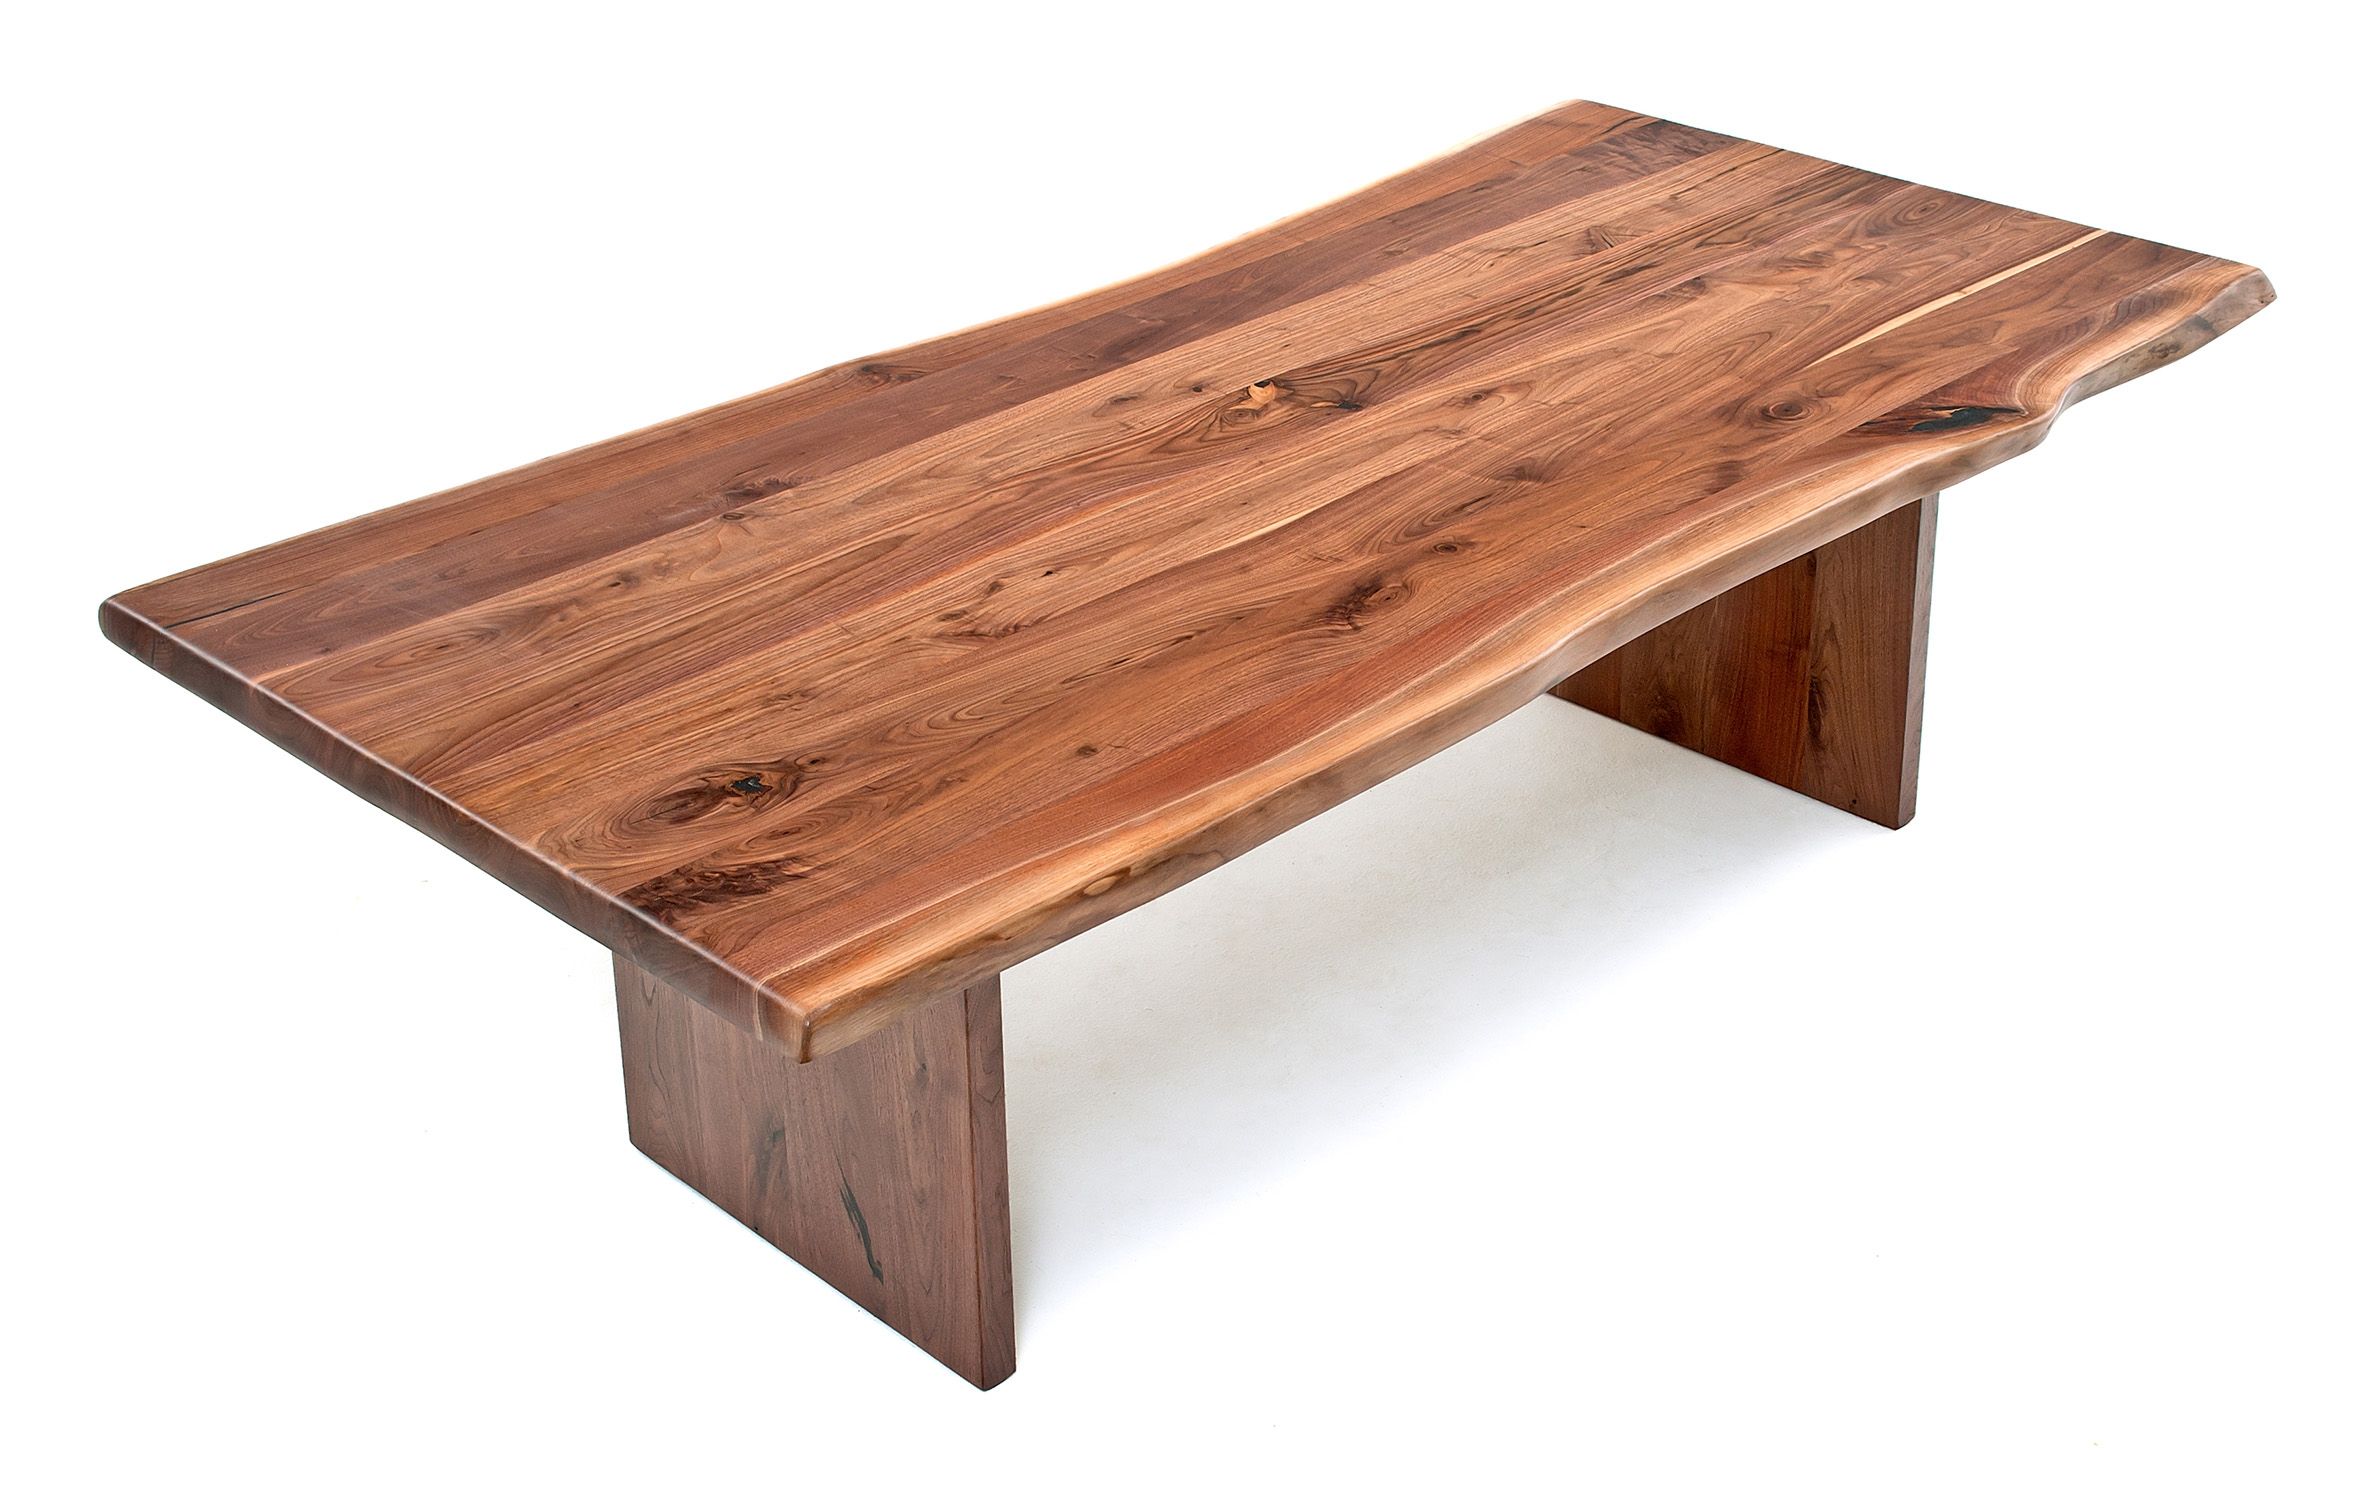 What Is Live Edge Wood Furniture Exactly?